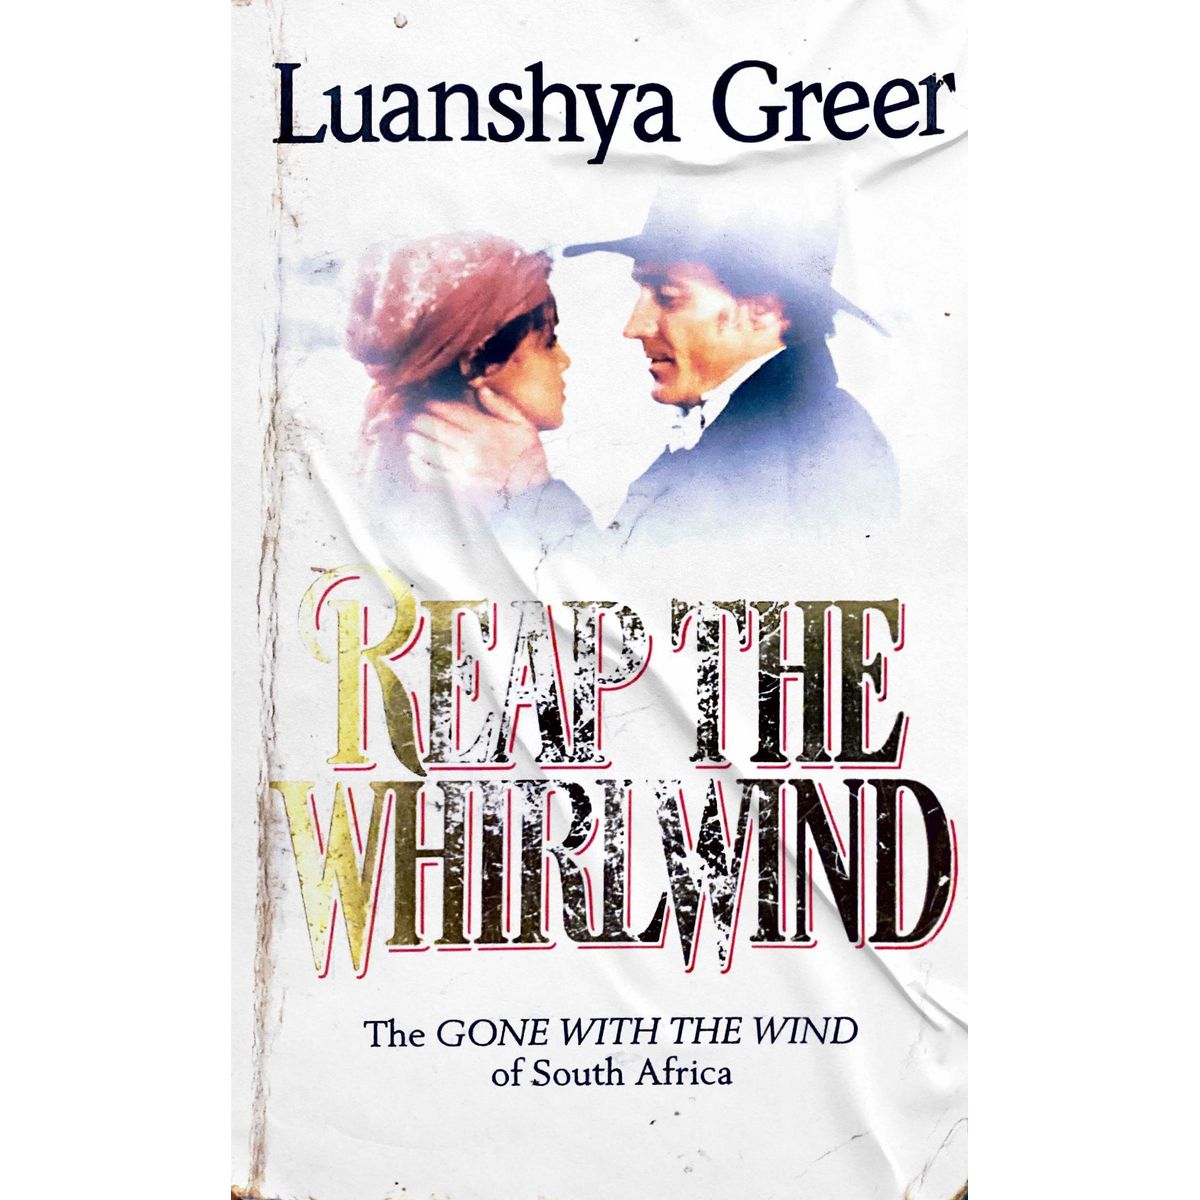 ISBN: 9781855017191 / 1855017199 - Reap the Whirlwind by Luanshya Greer [1995]